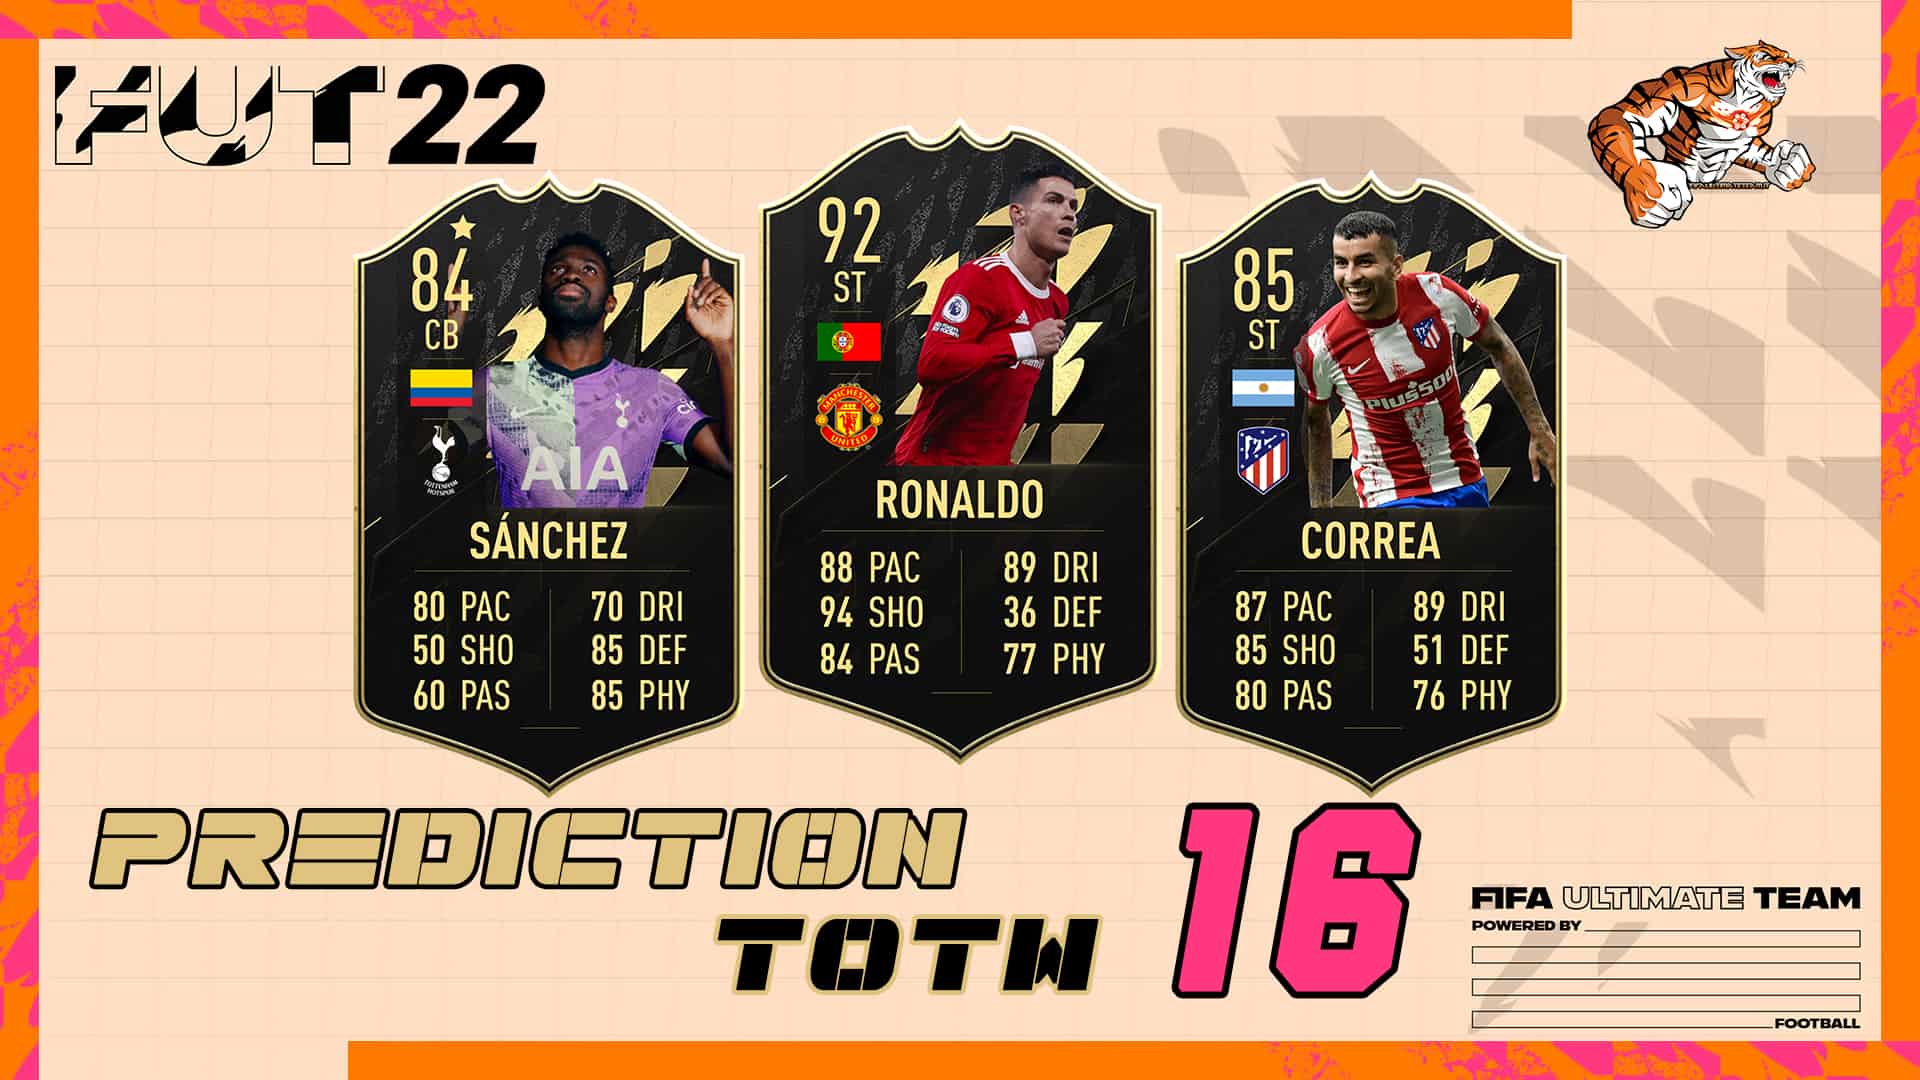 TOTW 16 ✓ Confirmed by (Futsheriff-TW) Which players are you